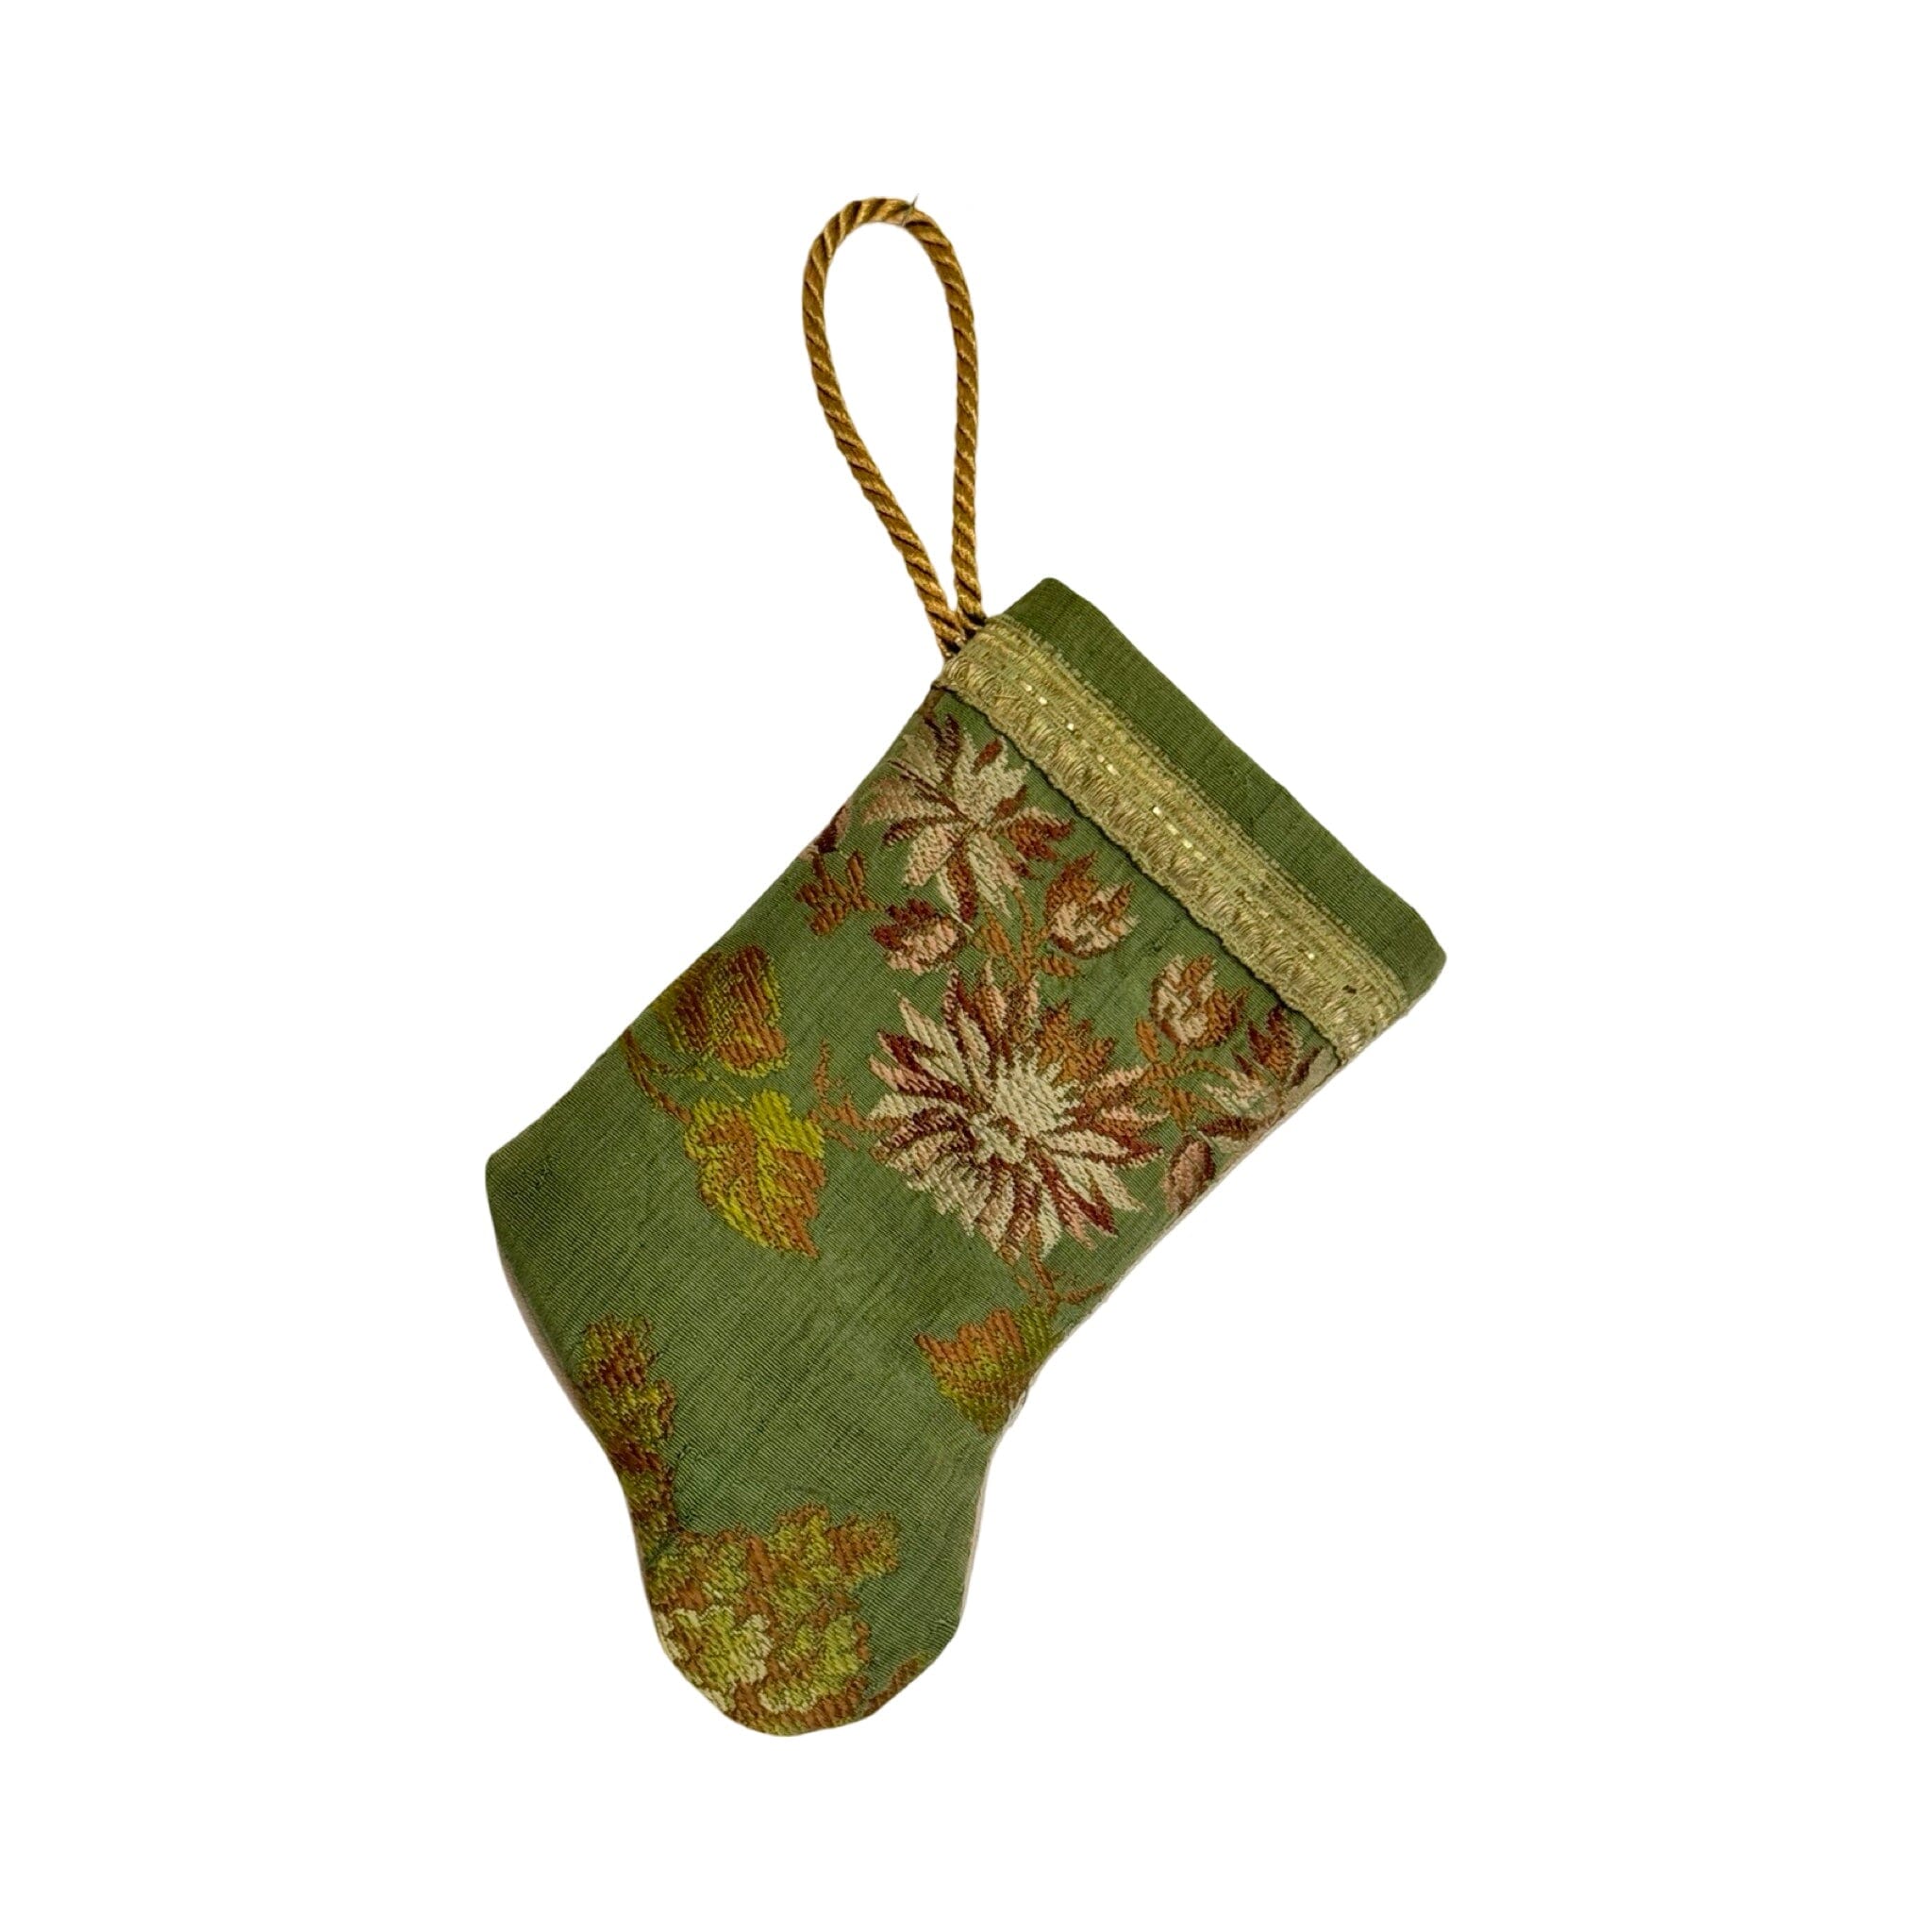 Handmade Mini Stocking Made From Vintage Fabric and Trims- Green Floral Ornament B. Viz Design C 